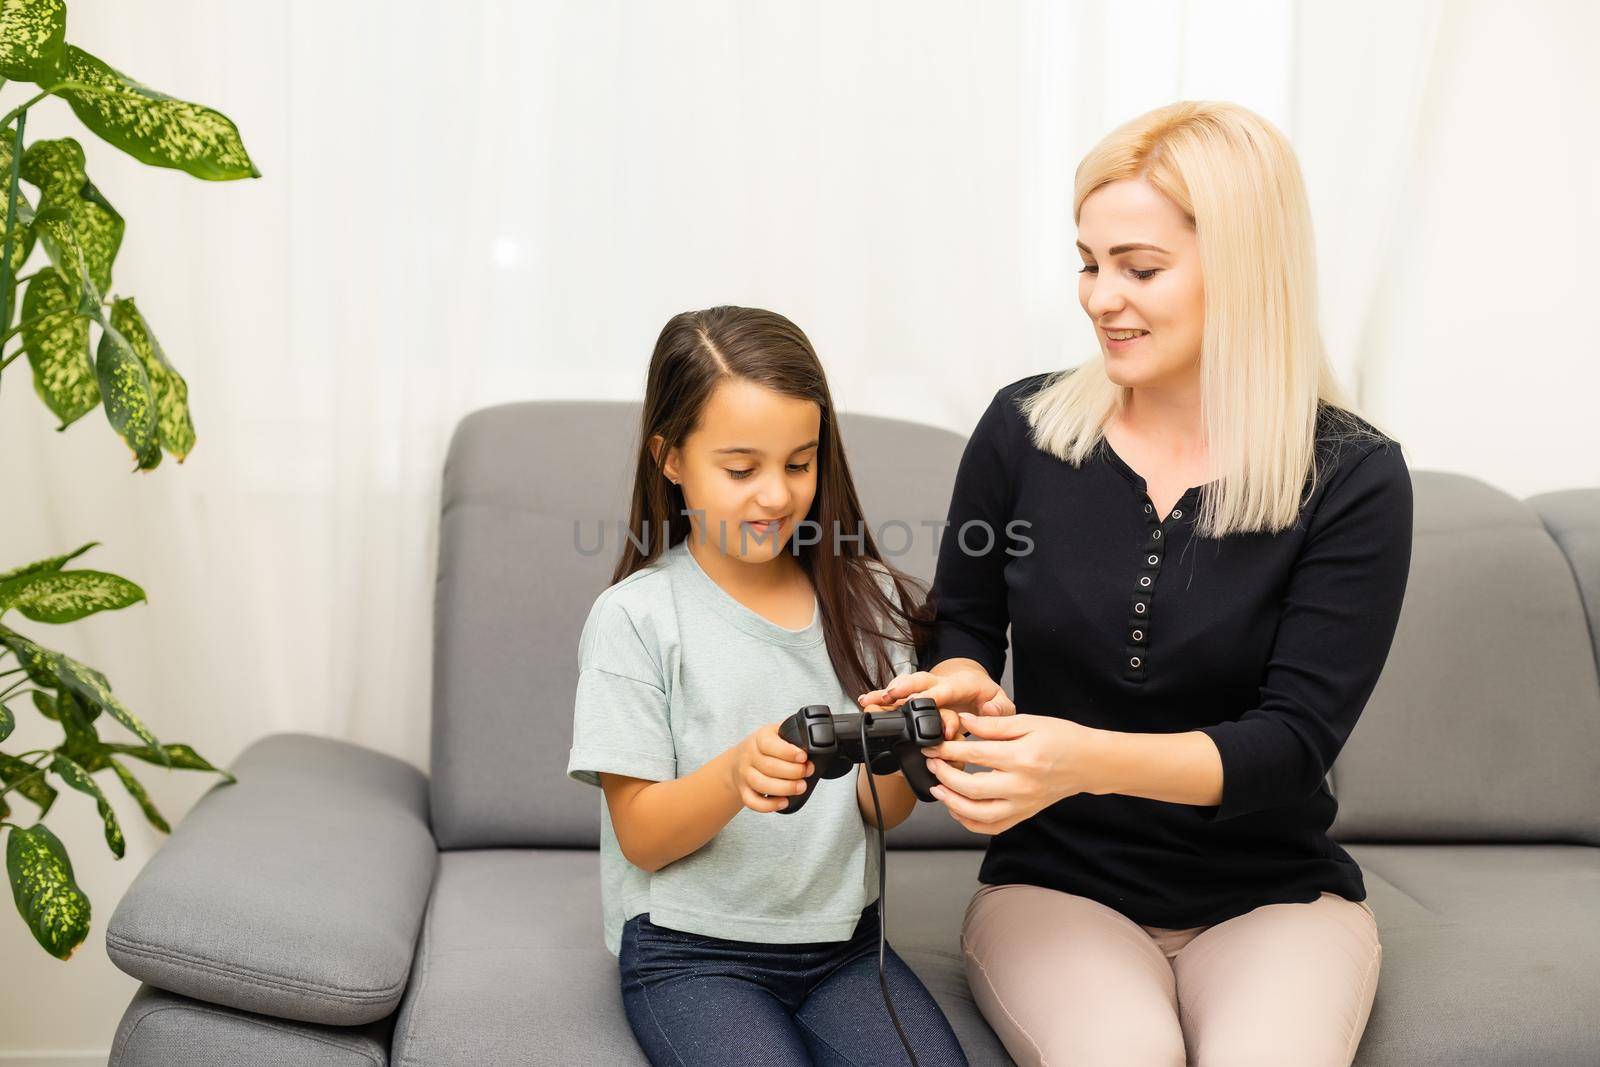 good relationship cute little girl with young mother using joystick playing video game sitting together in living room enjoying family holiday.